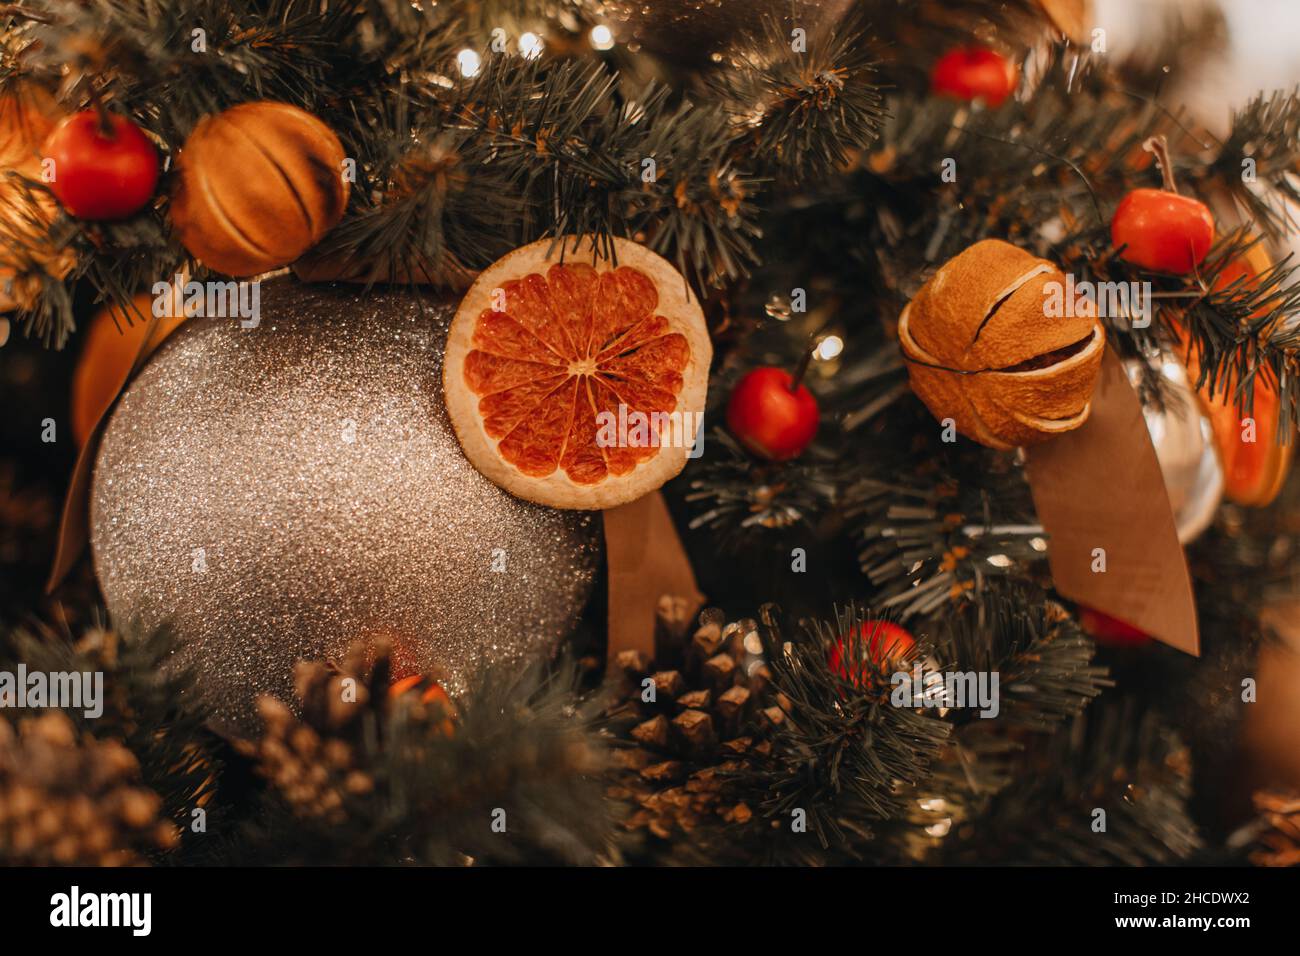 Dried oranges, berries, cones hanging on the Christmas tree. Creative festive details and golden Christmas ball. Winter magic New Year decor Stock Photo